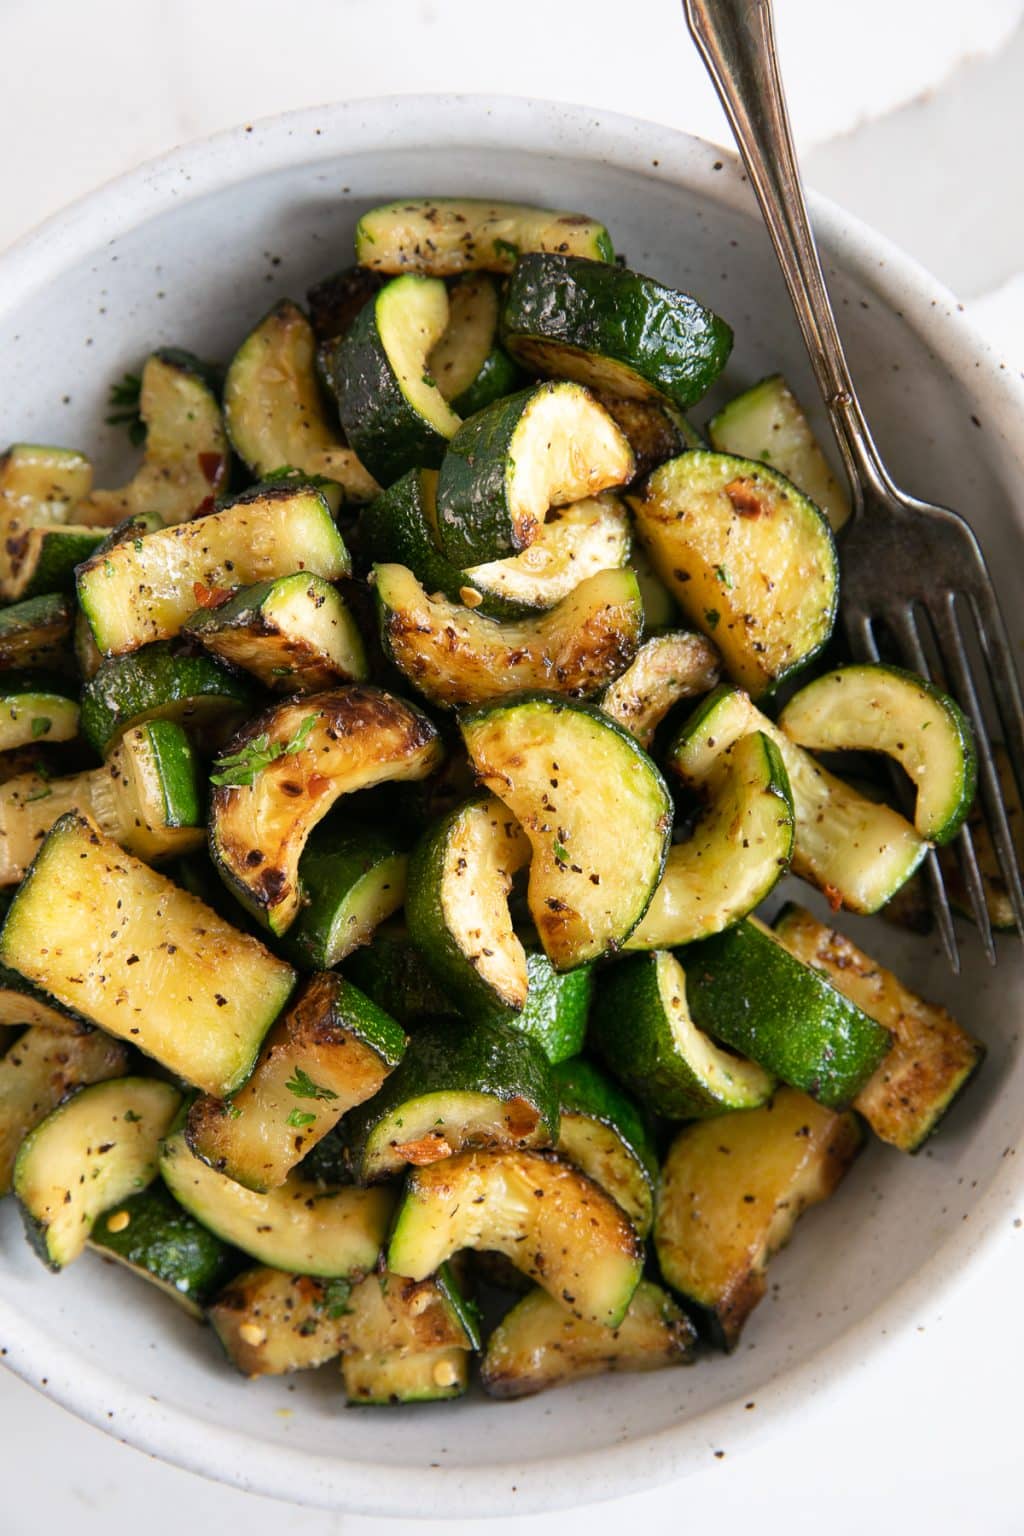 Sauteed Zucchini - The Forked Spoon